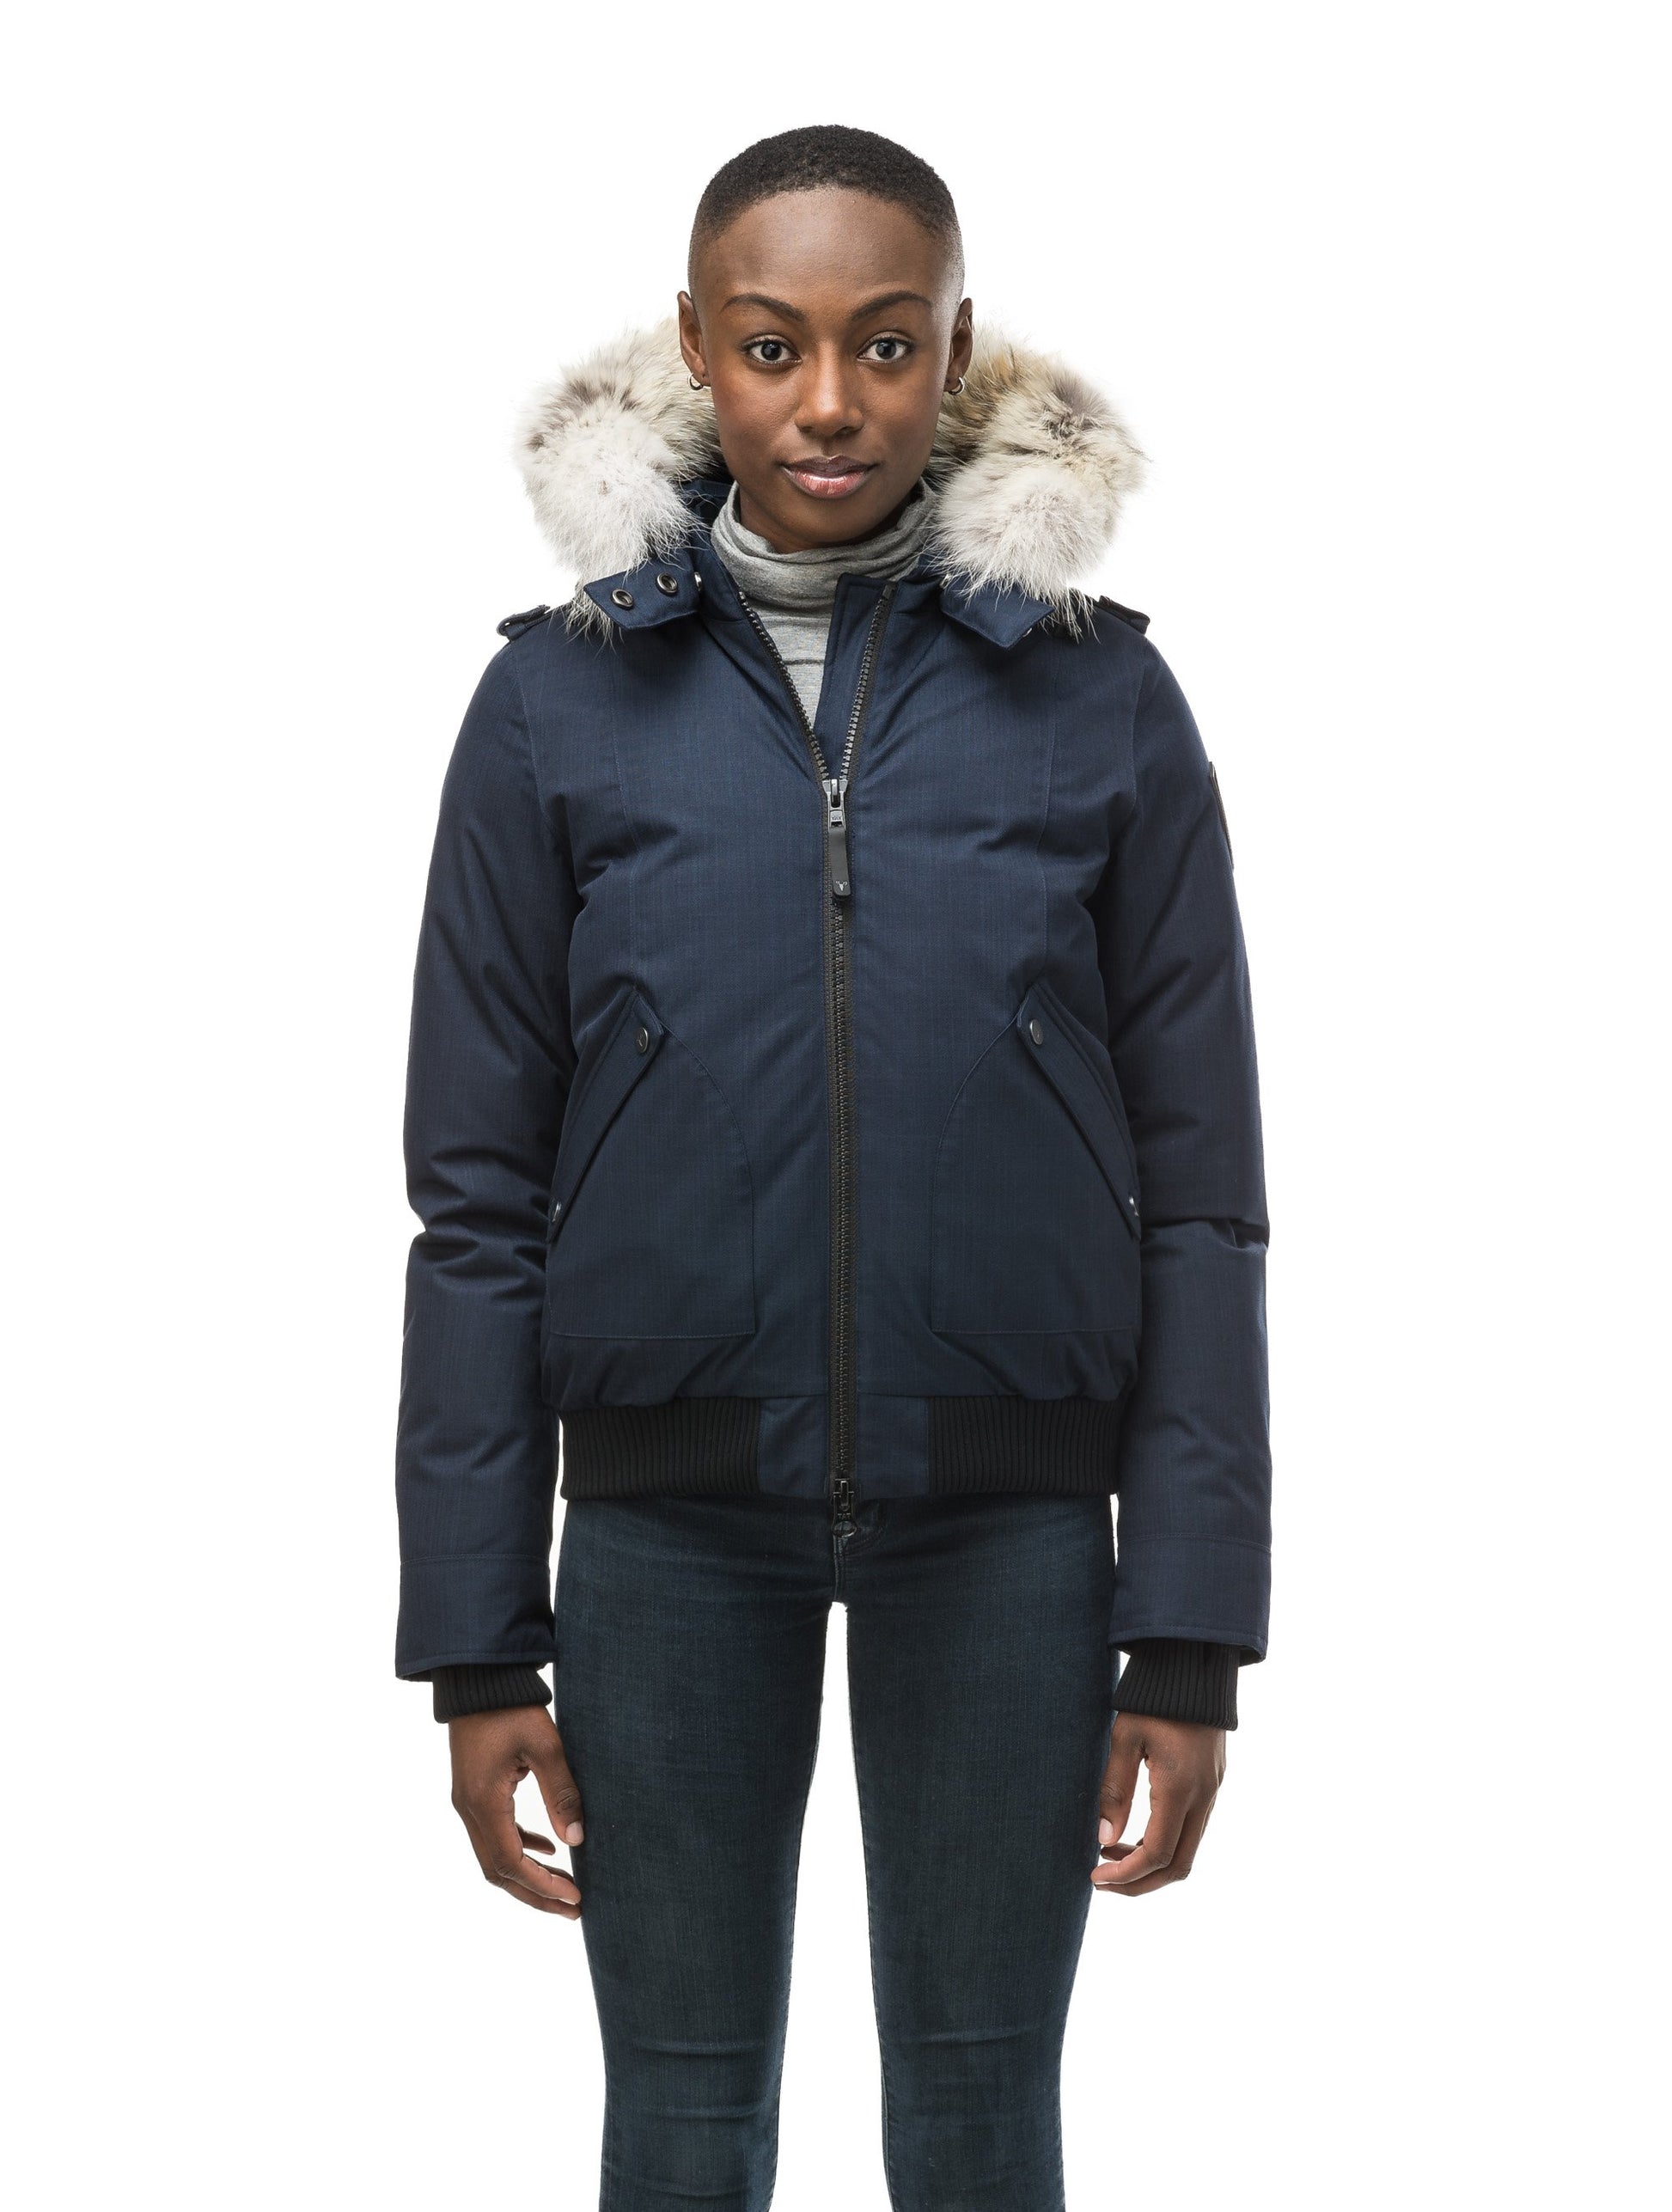 Women's bomber style down filled jacket with a removable hood and fur trim in CH Navy